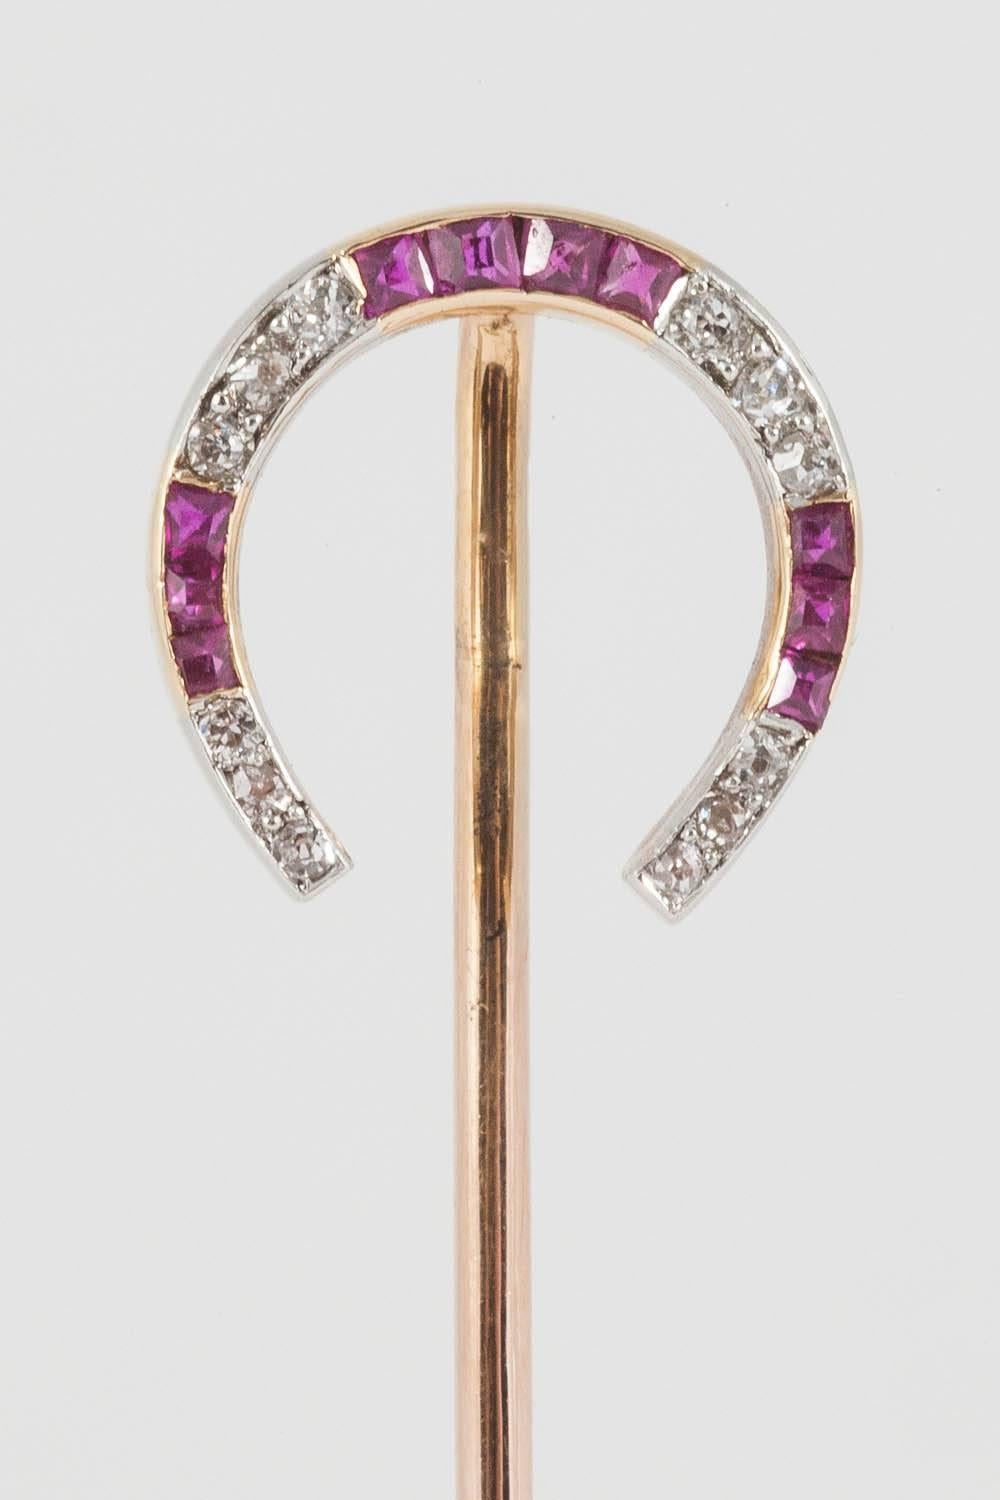 A platinum set and gold mounted Tiepin in the form of a horseshoe,the diamonds brilliant cut,and the attractive Burma rubies square cut and channel set.French marked c,1900